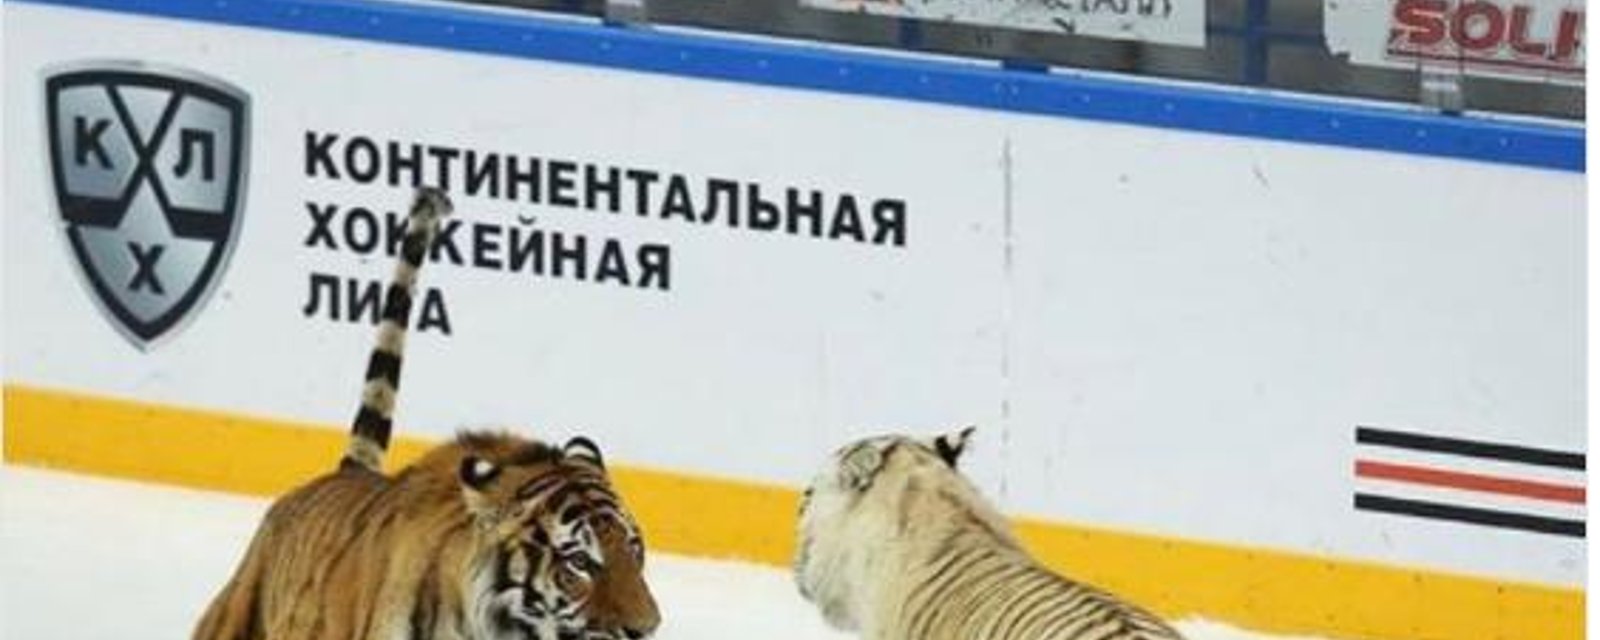 The KHL finds special way to promote its league. 